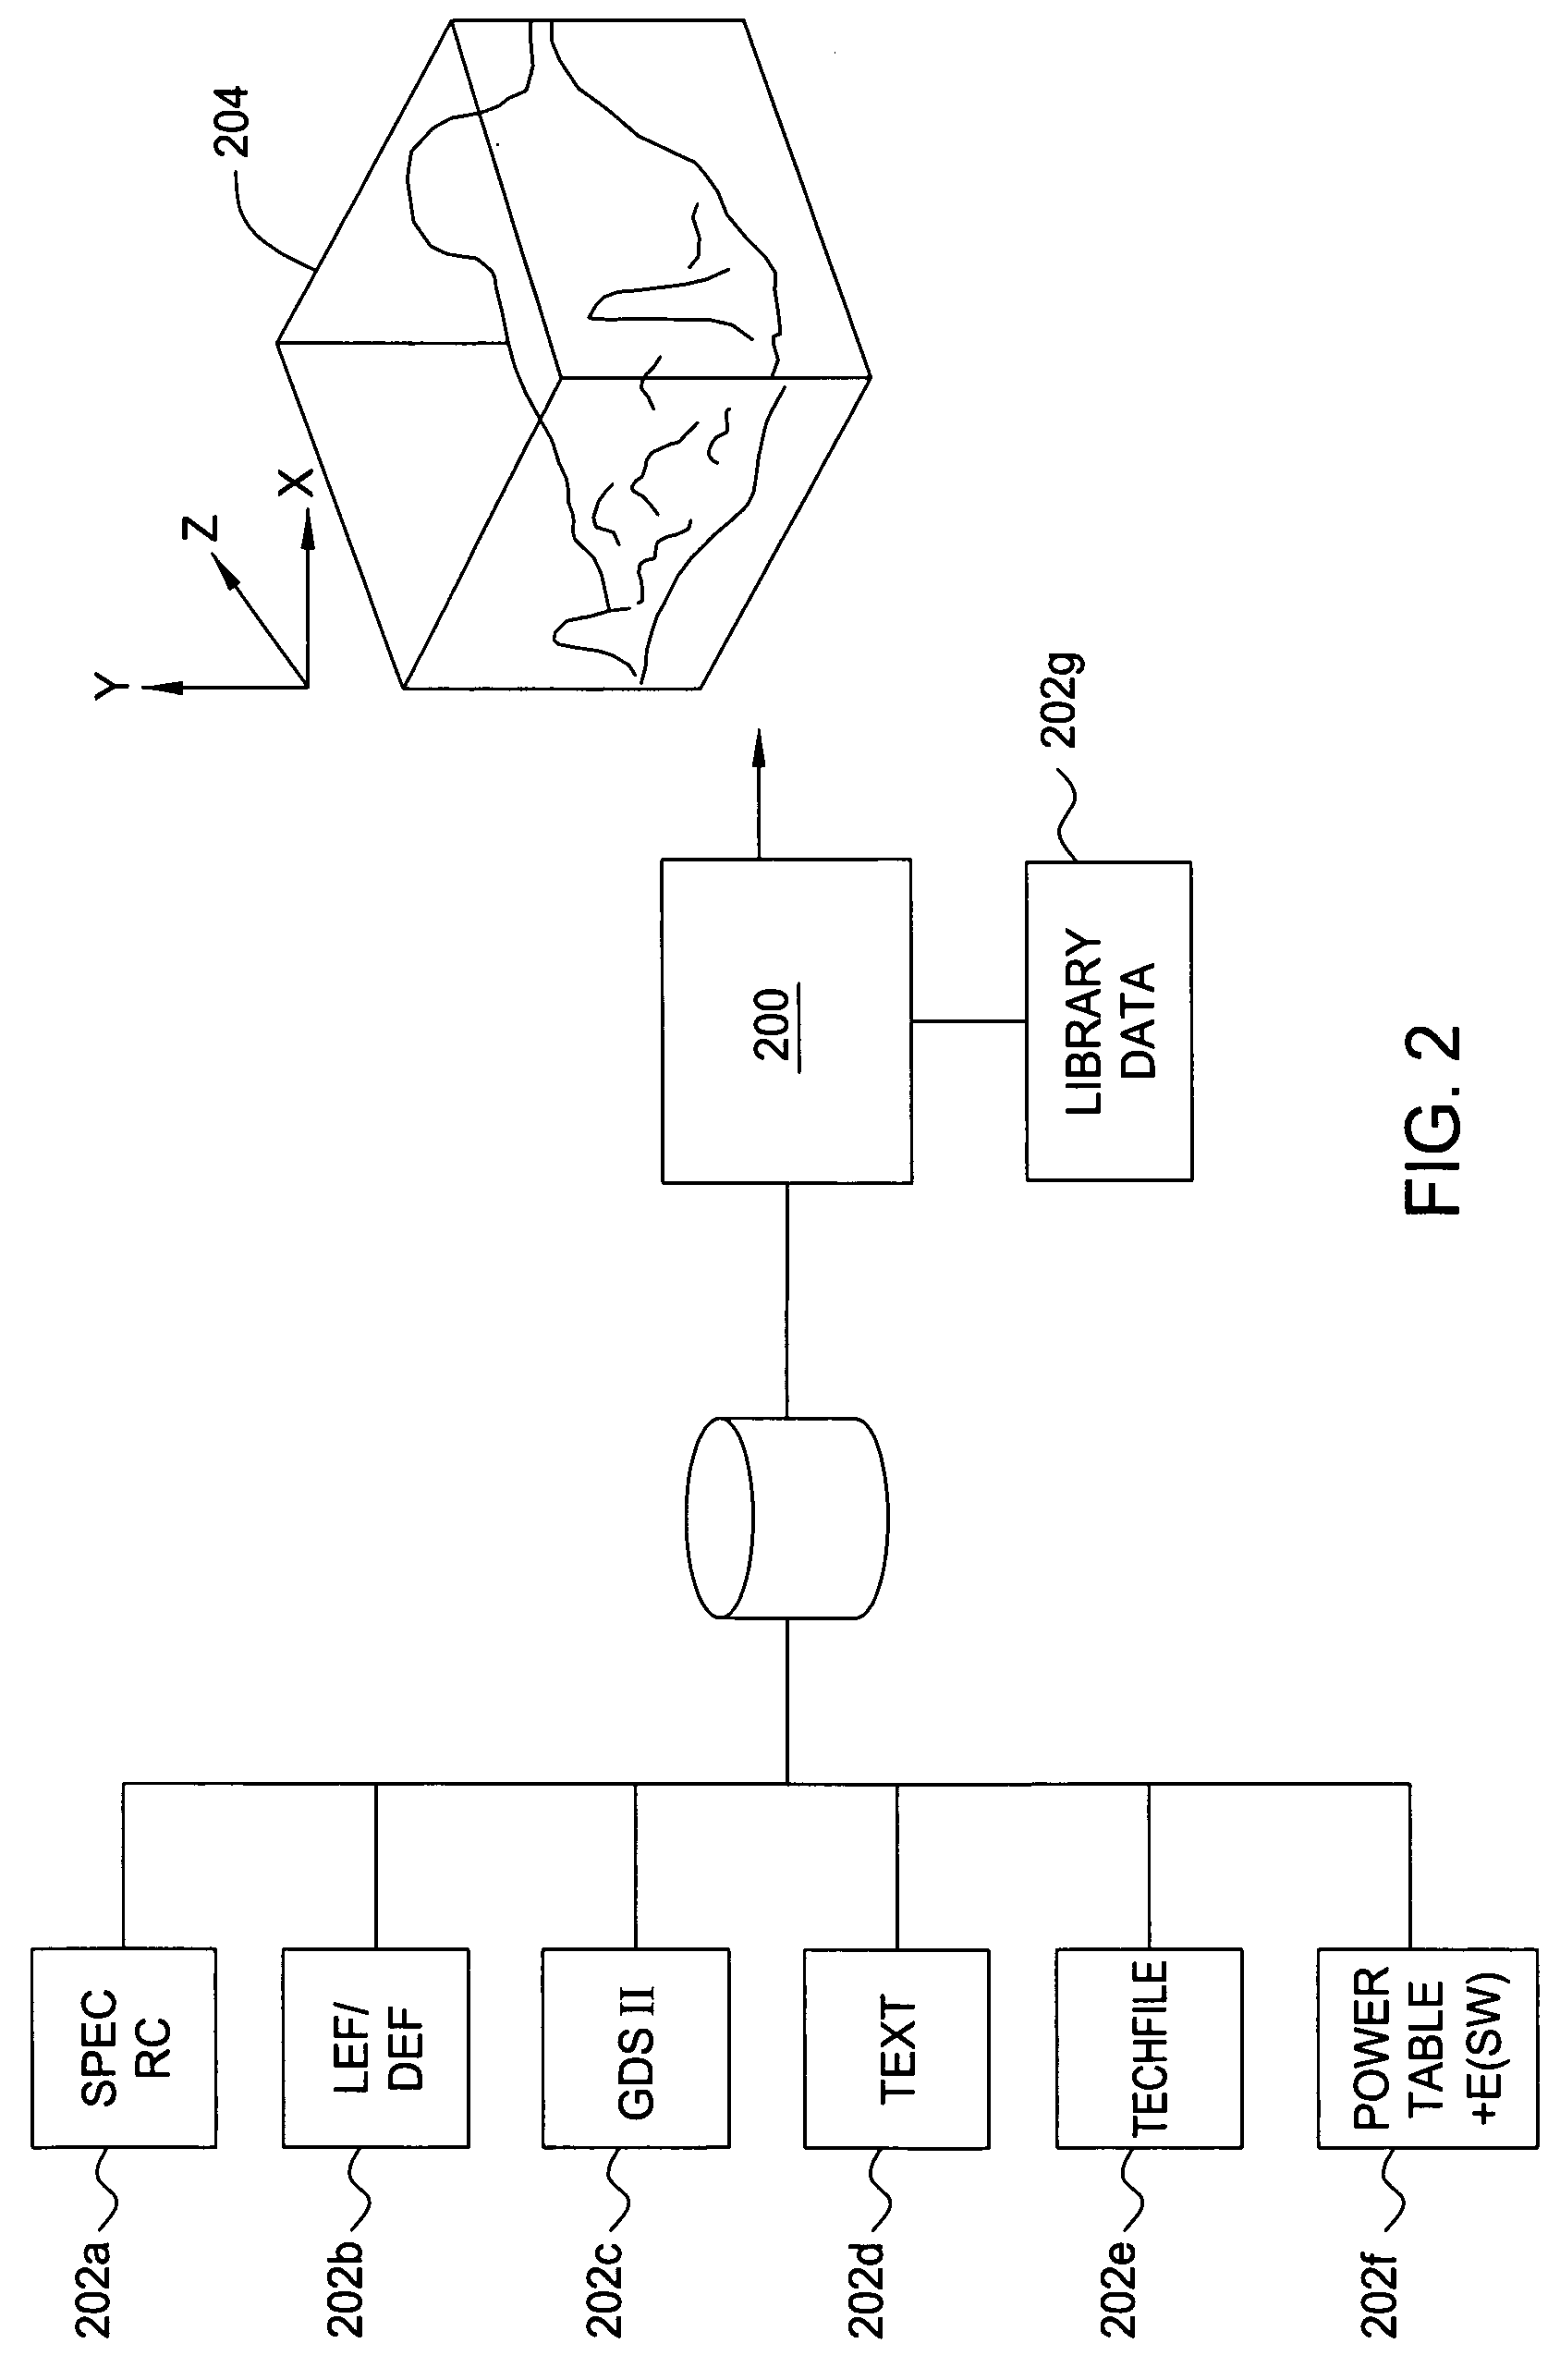 Method and apparatus for full-chip thermal analysis of semiconductor chip designs